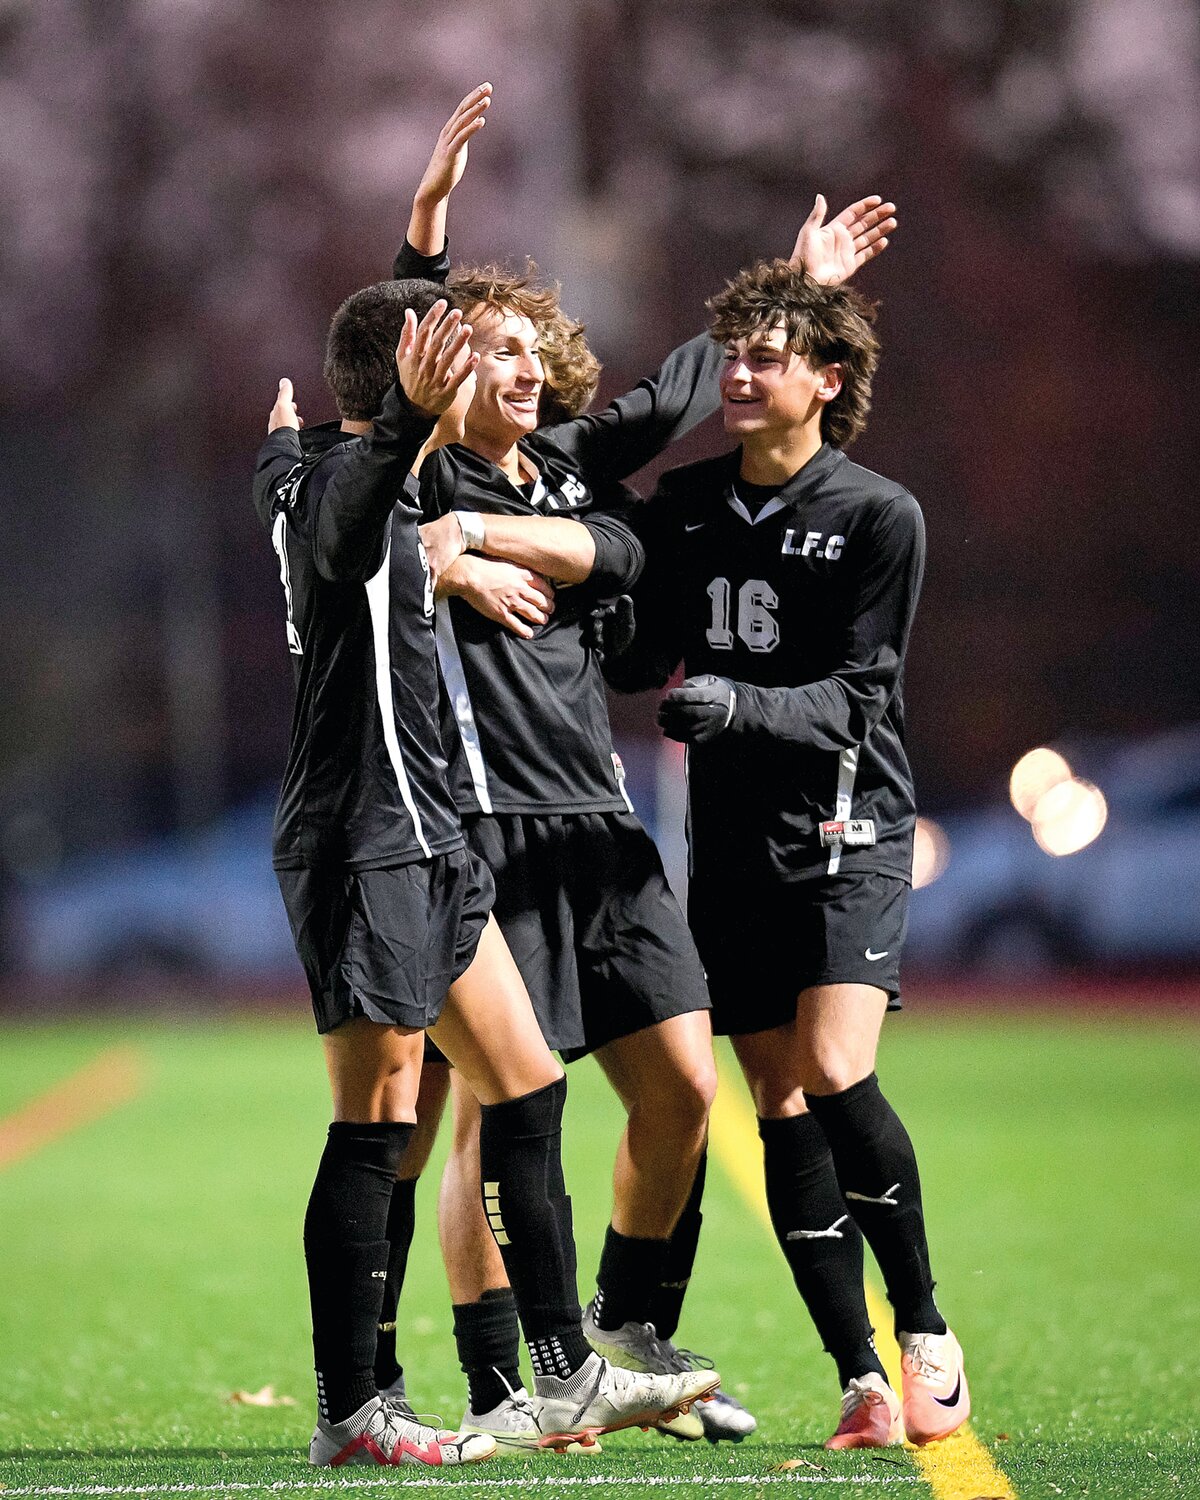 Faith Christian’s Guilherme Machado celebrates his second goal of the game, putting Faith up 3-1 at the time.